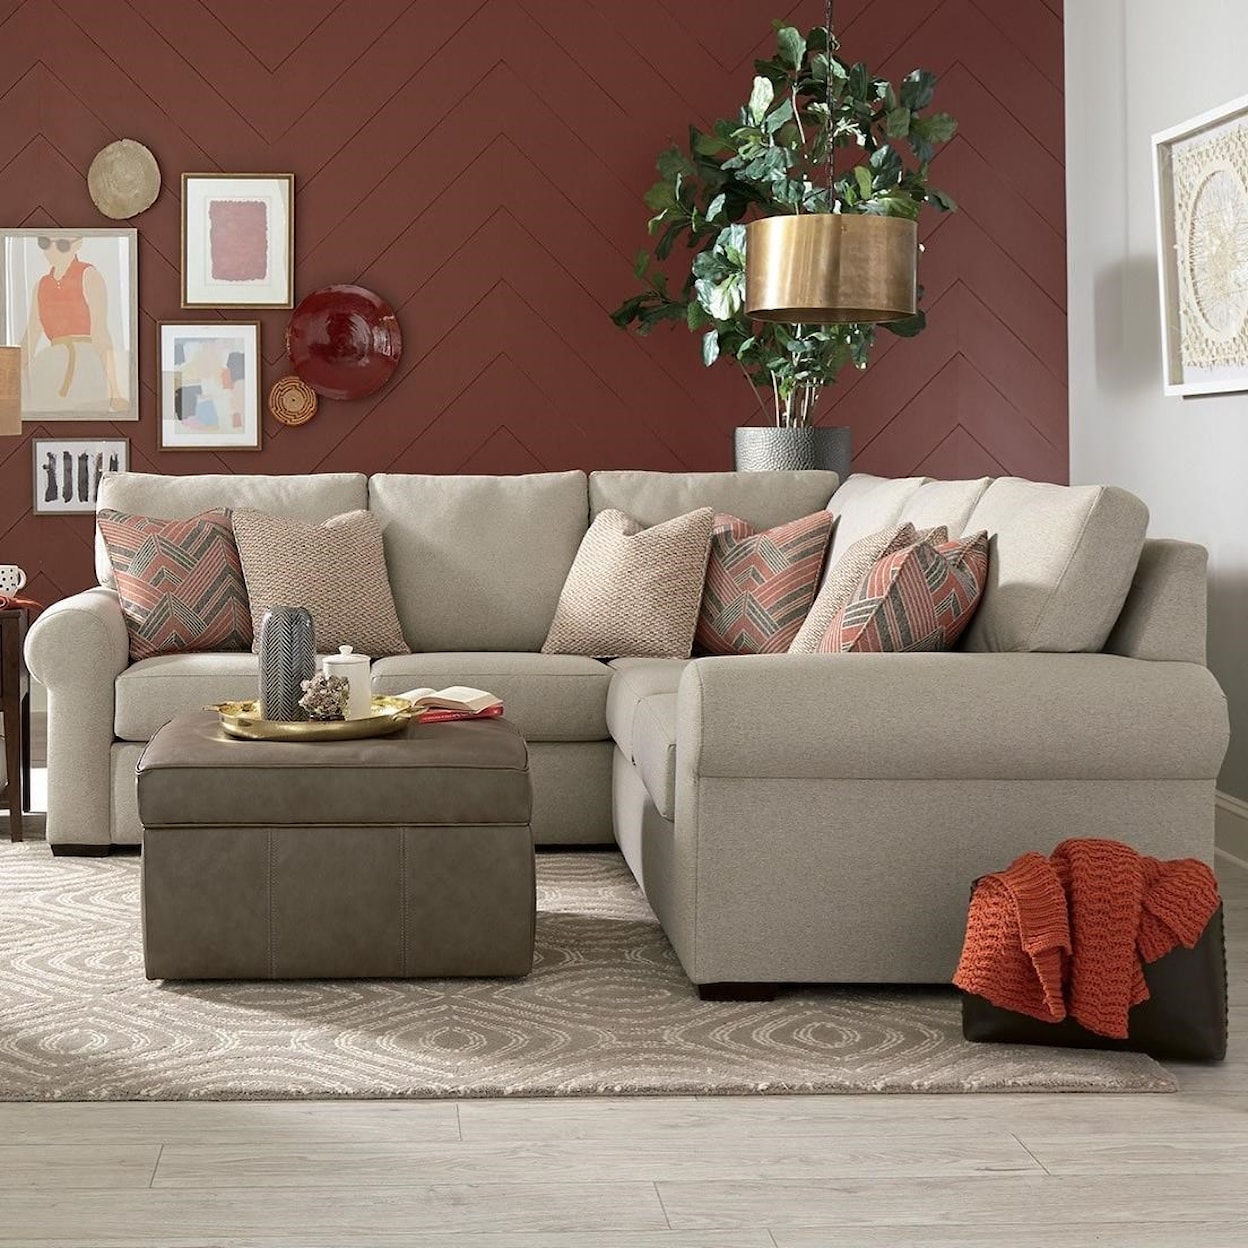 England Ailor Sectional